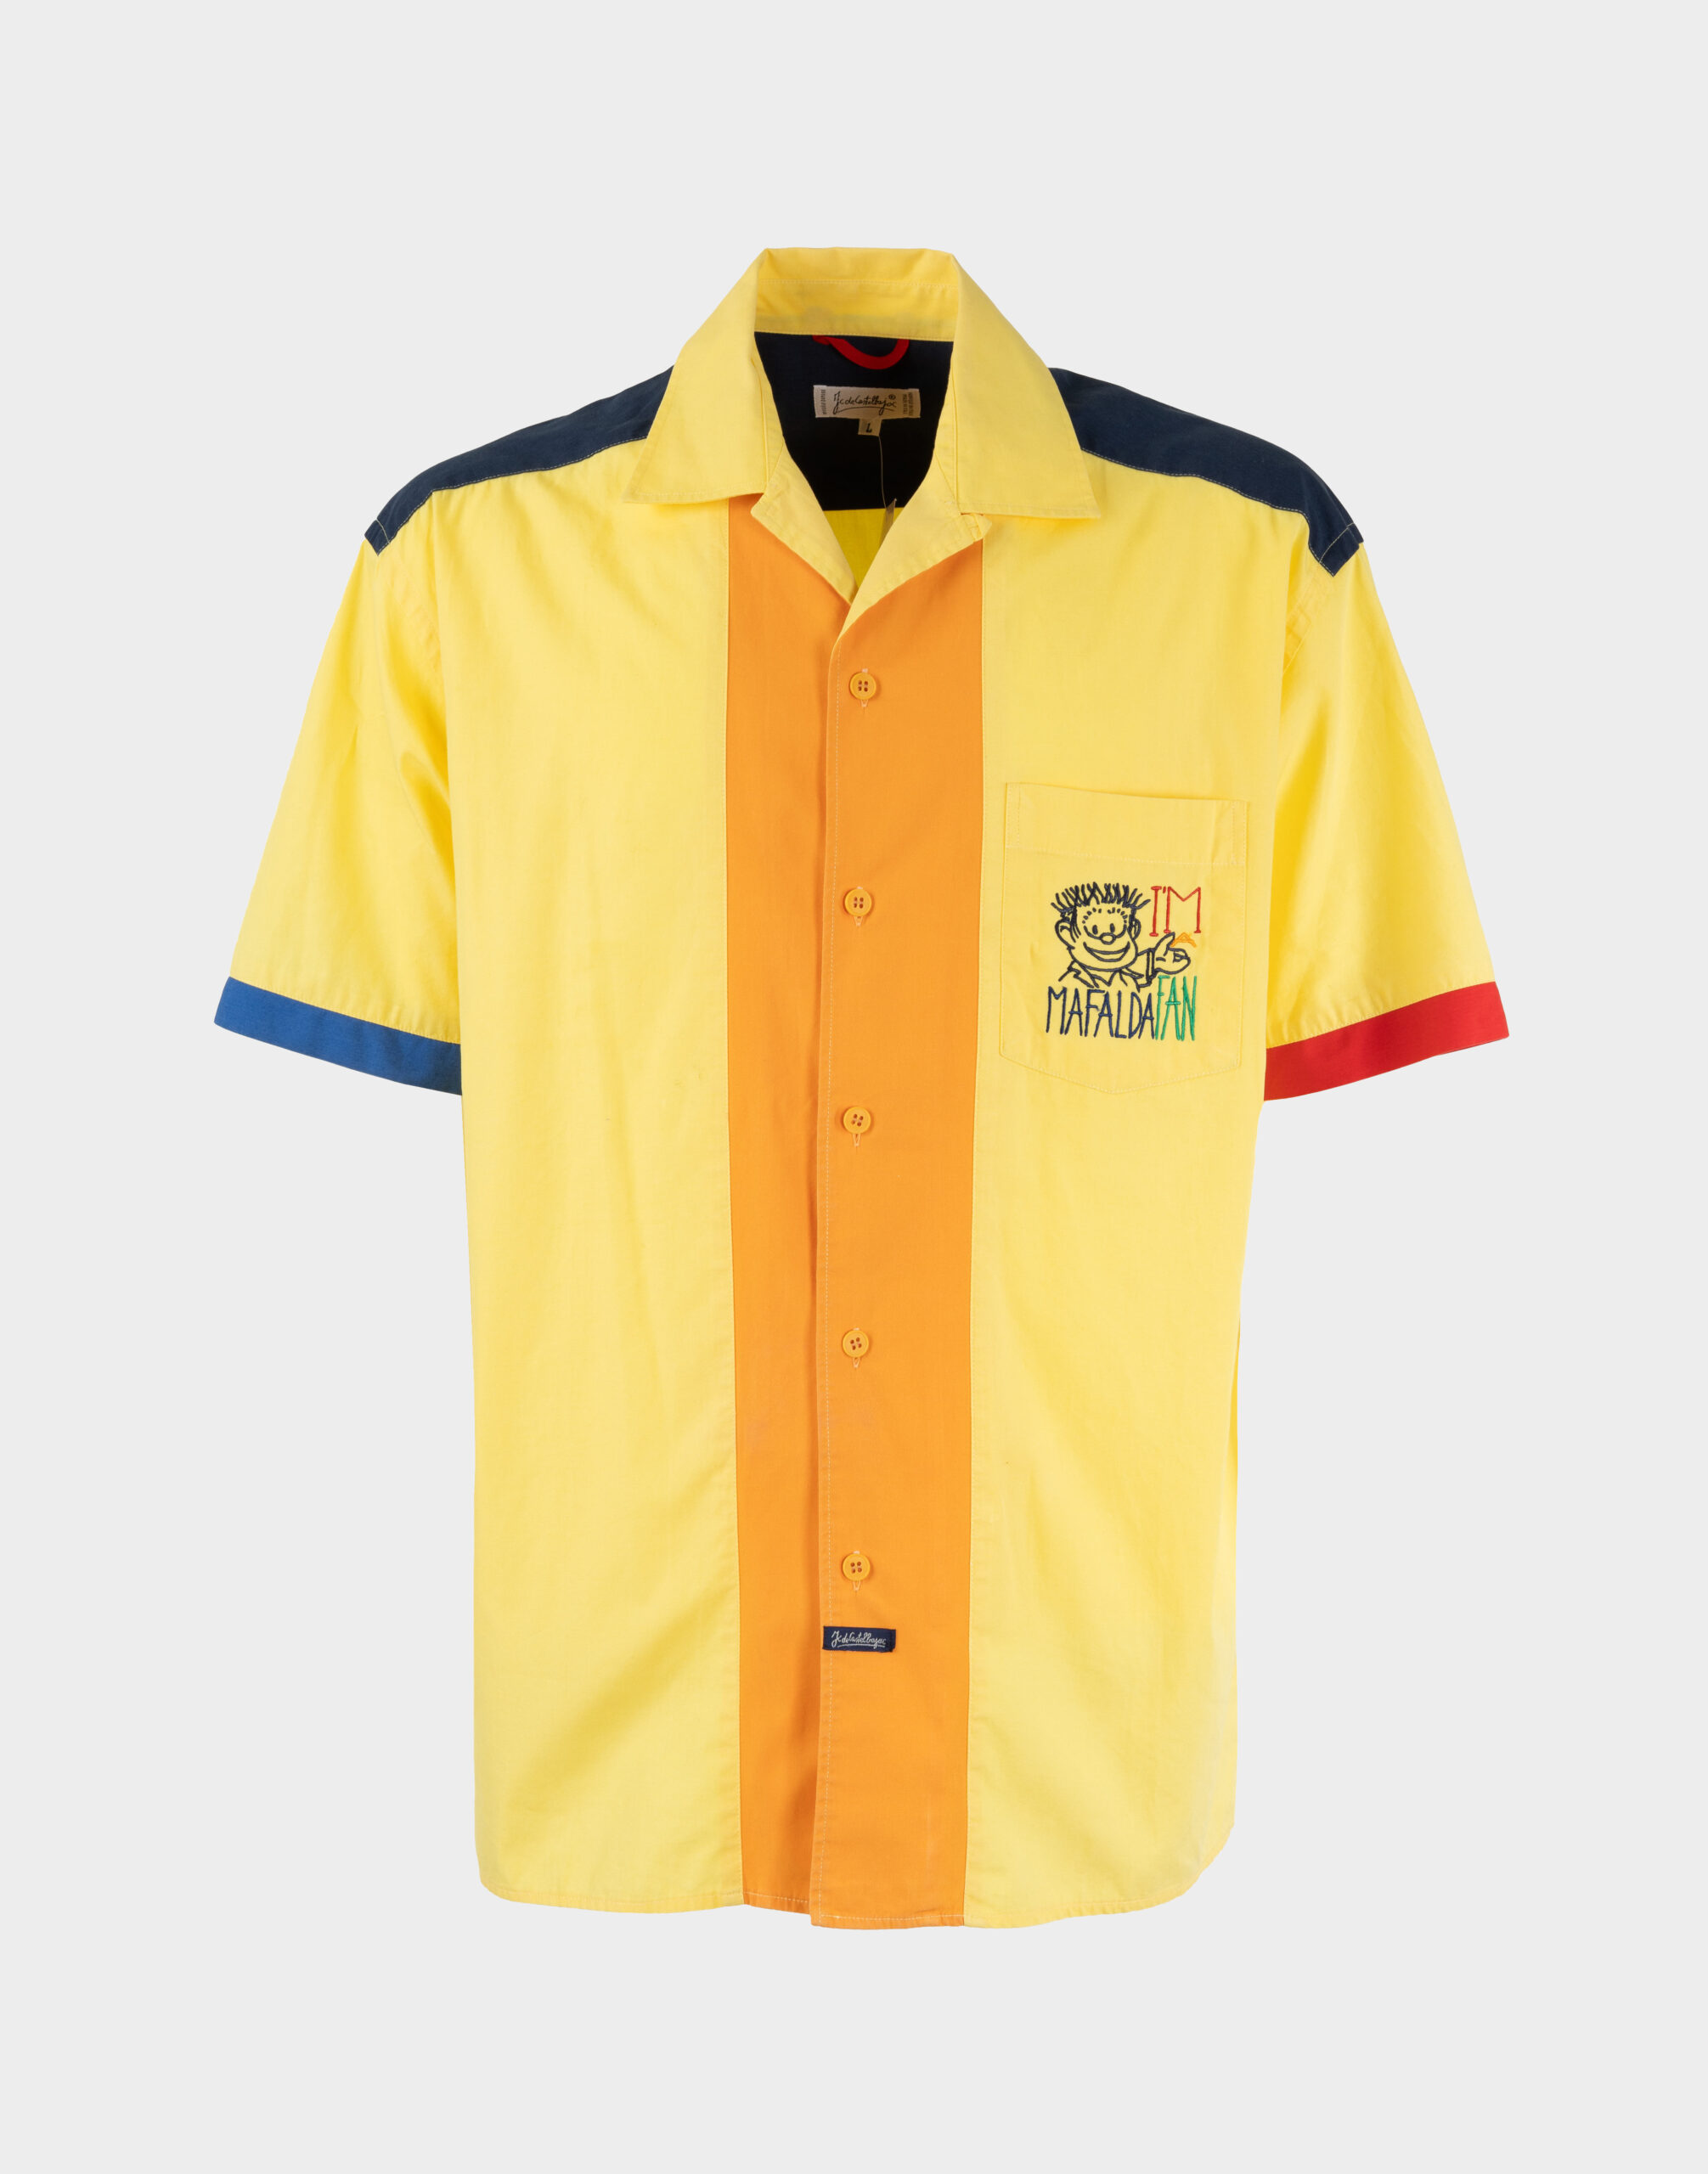 Men's short-sleeved yellow shirt with blue and red details, button closure, and embroidered little man on the pocket